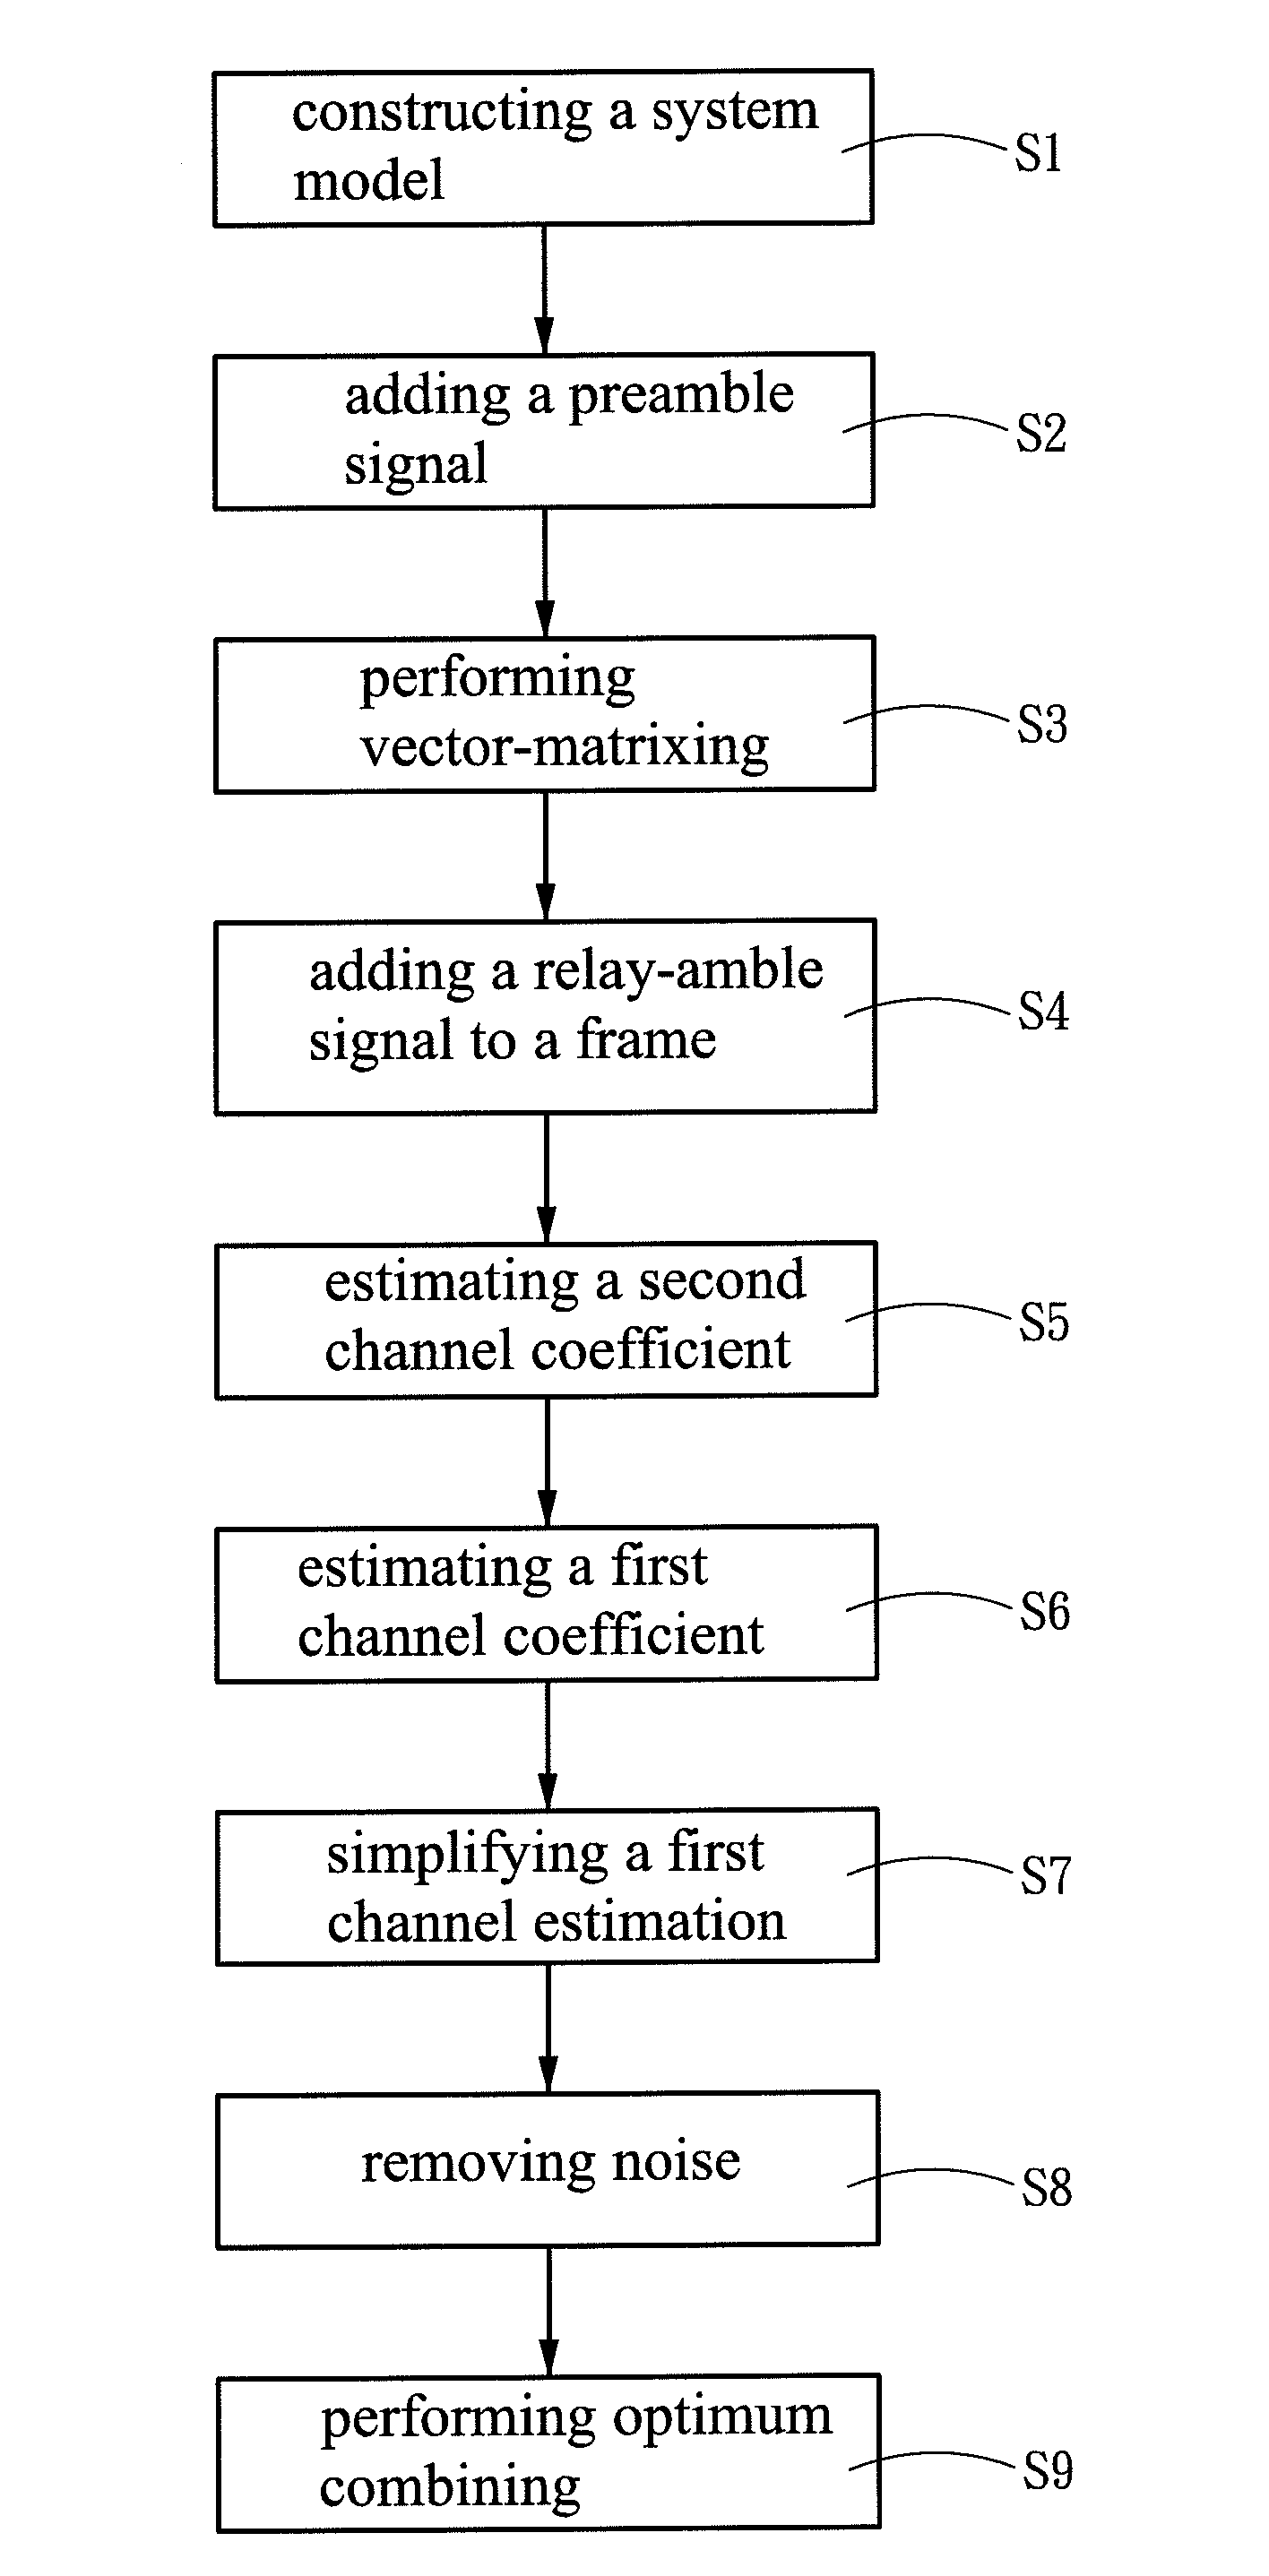 Ofdm-based relay-assisted channel estimation method